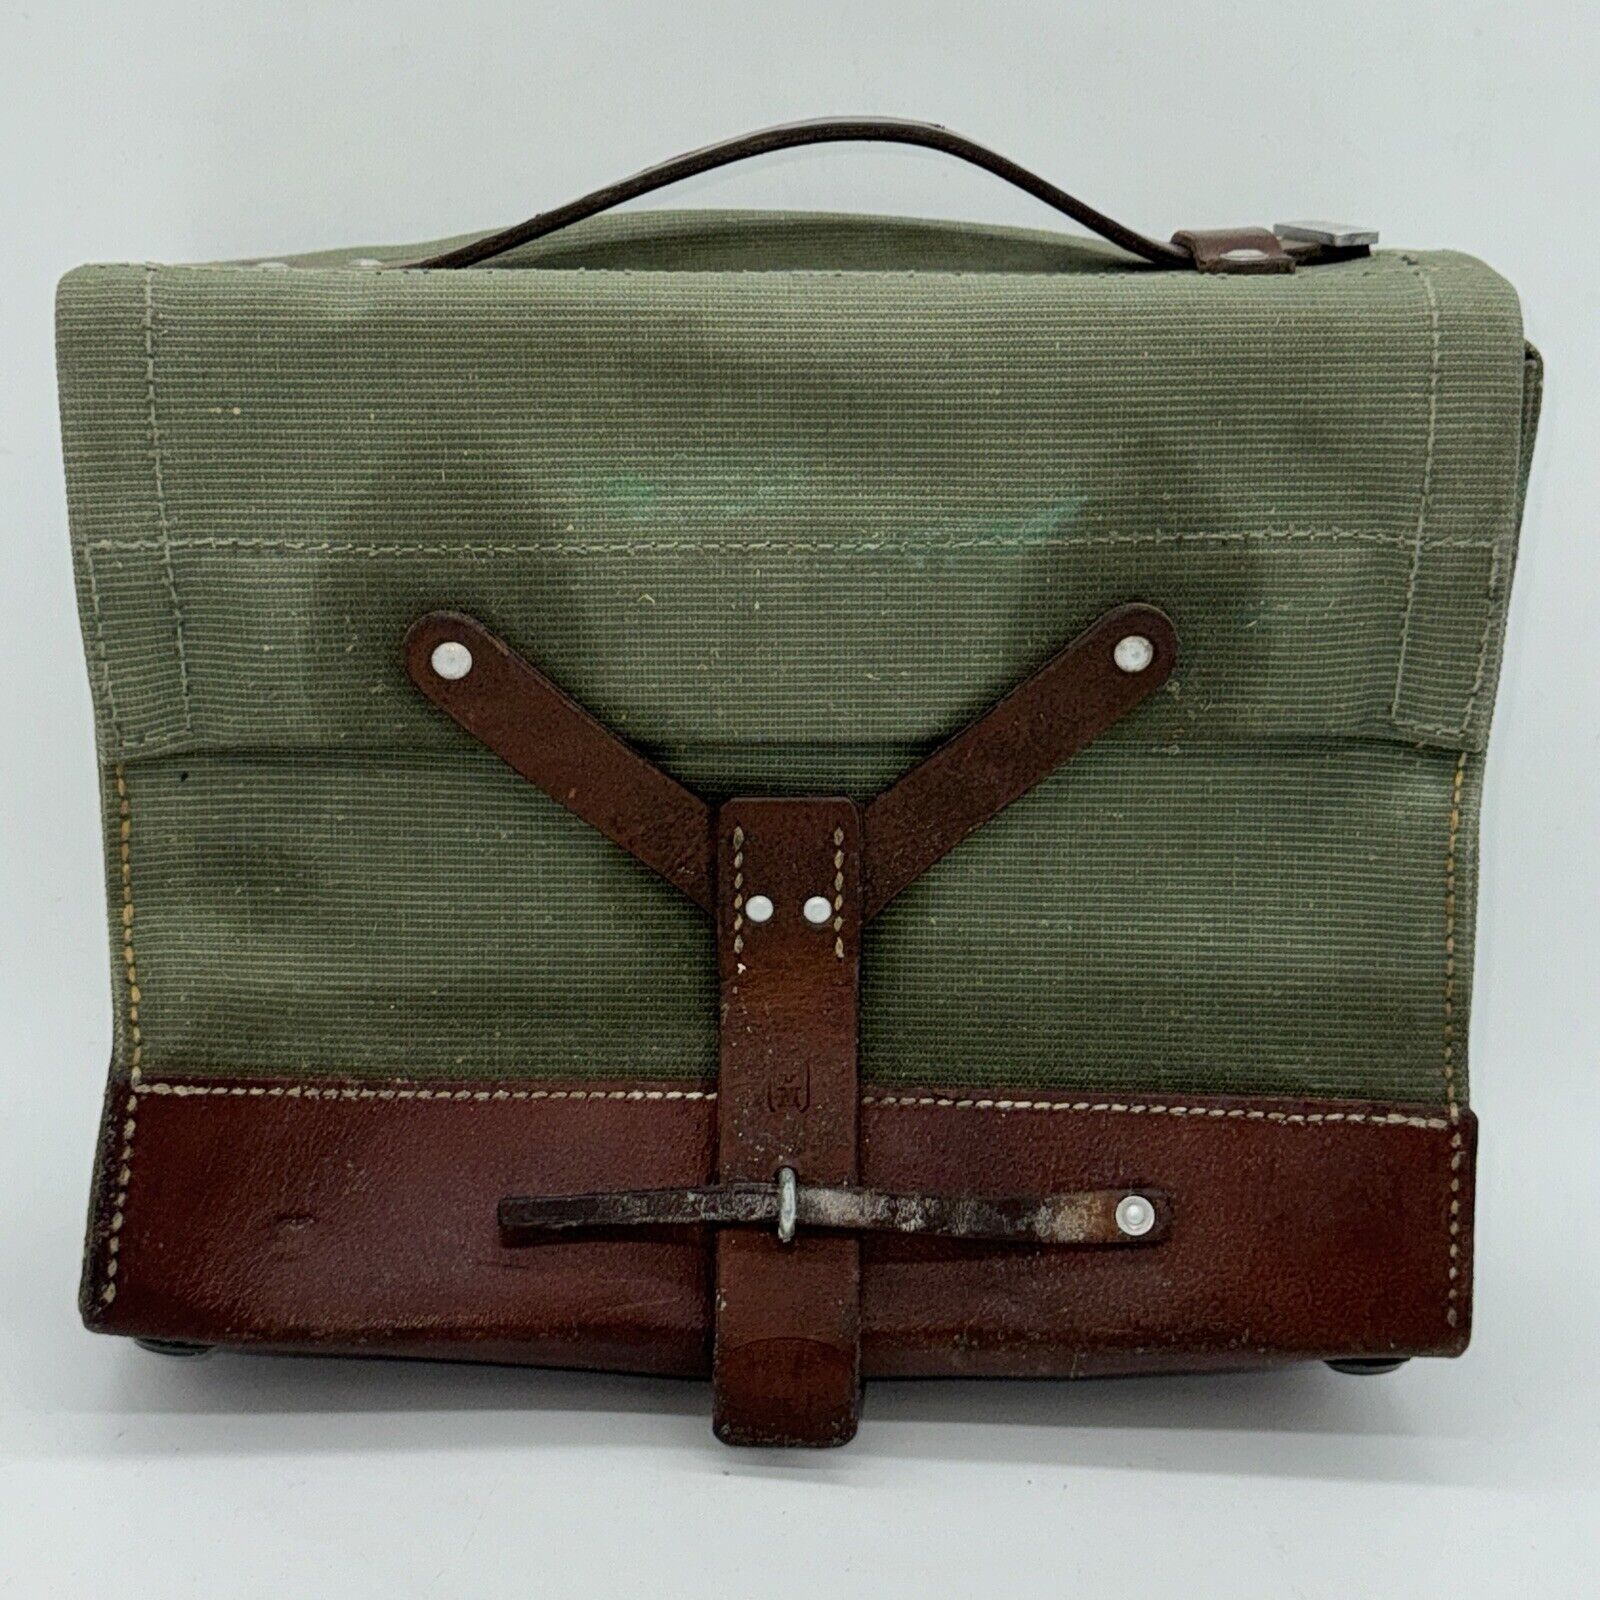 VTG Swiss Medic Military Leather and Green Canvas Carry Bag R. Gerber Kappelen